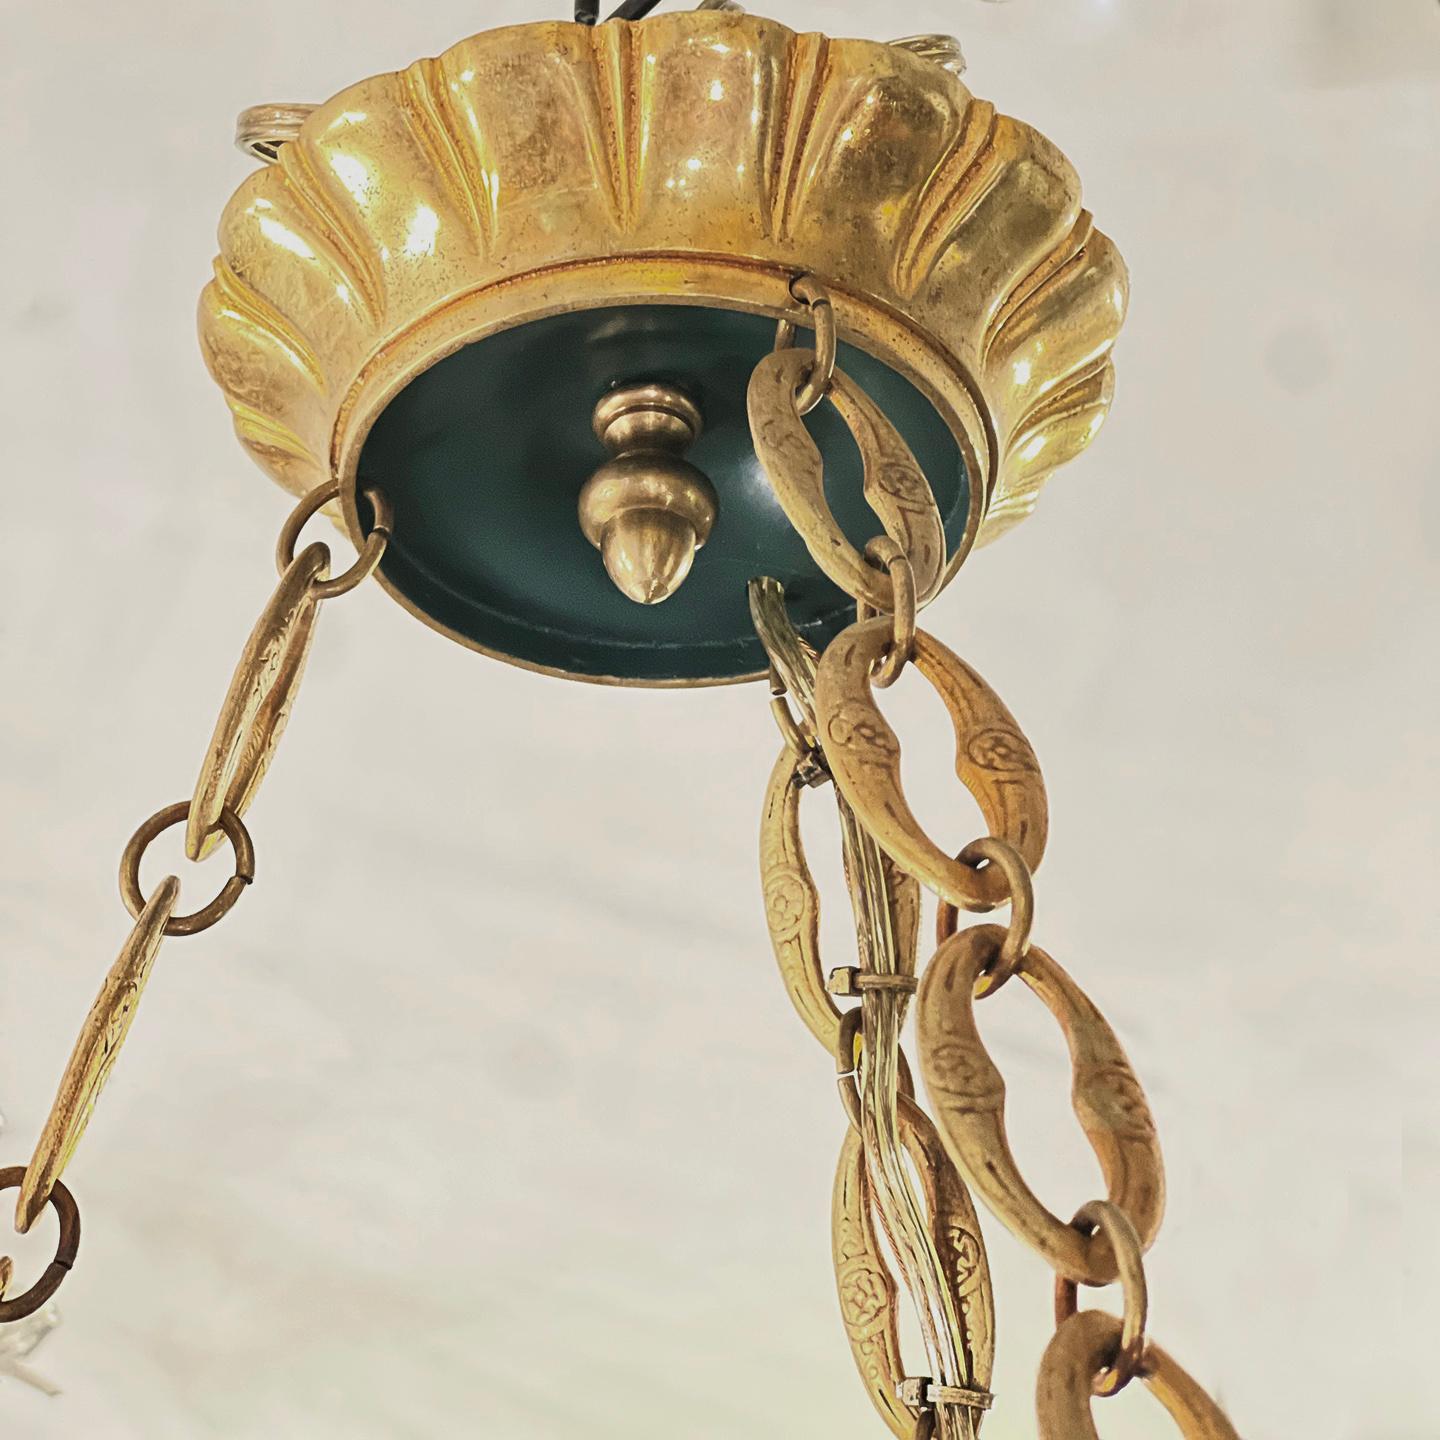 Pair of French circa 1910's bronze six-arms chandeliers with original finish. Sold individually.

Measurements:
Drop: 32